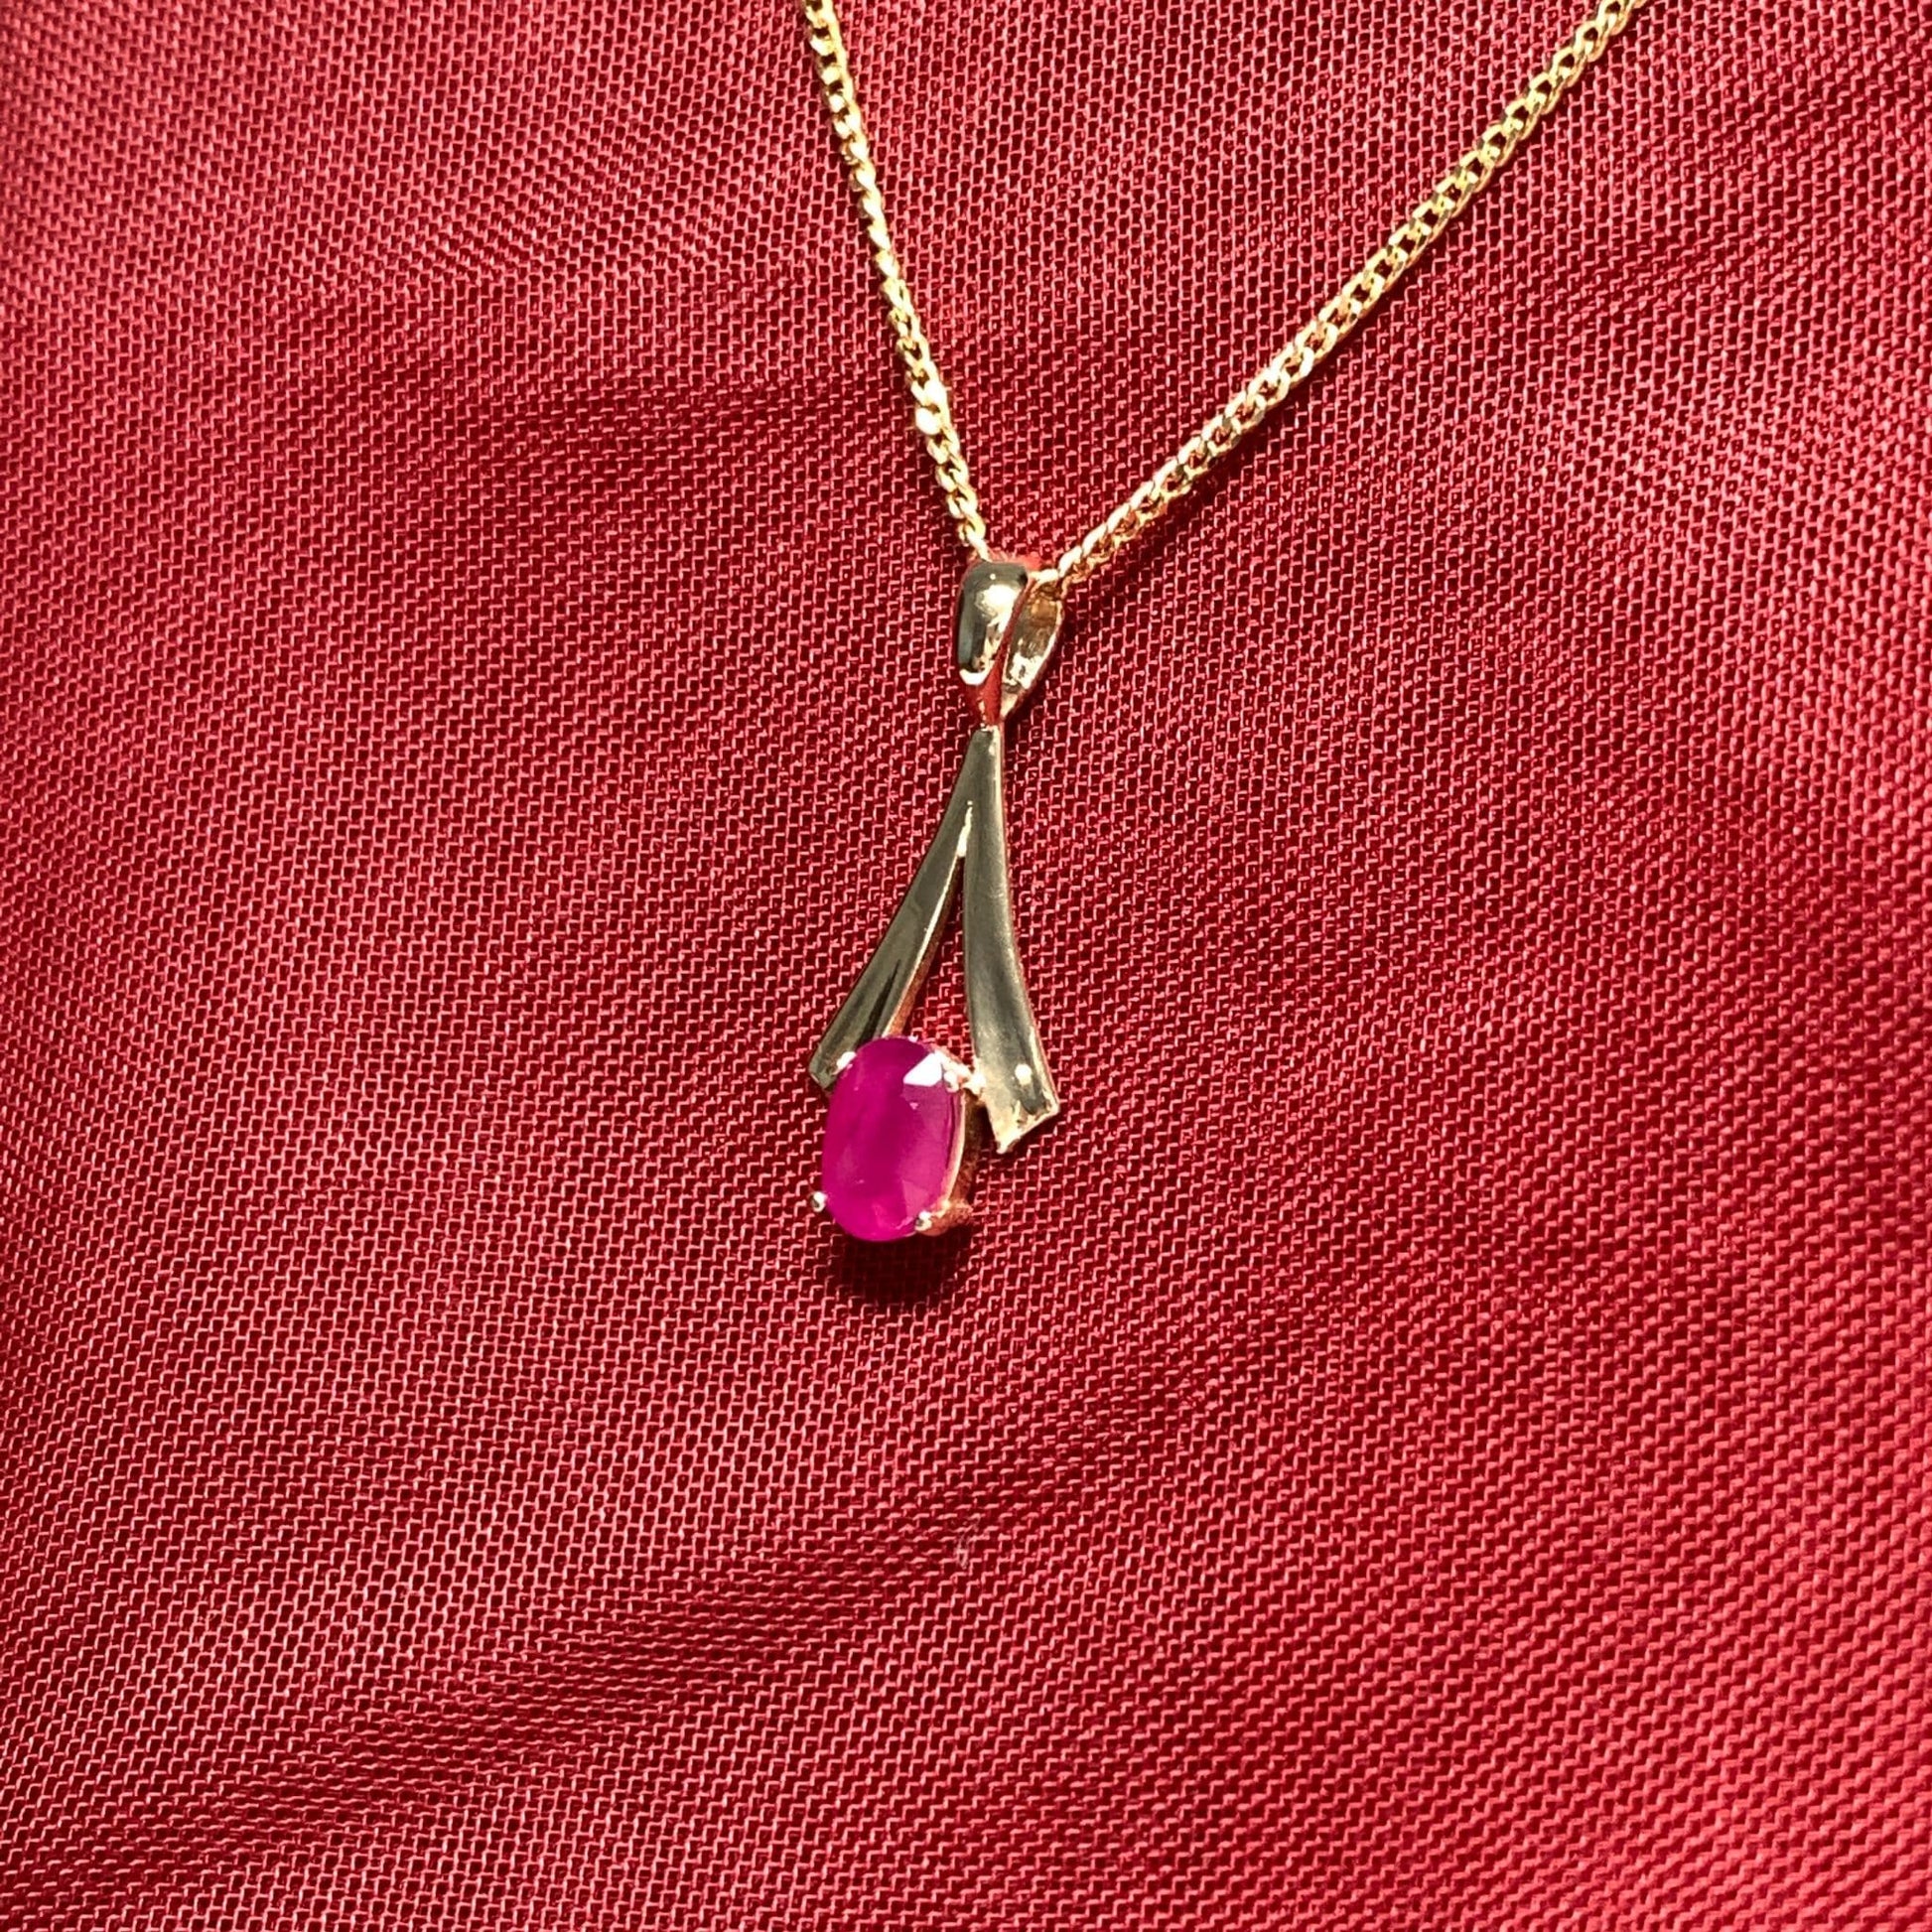 Yellow Gold Oval Ruby Necklace